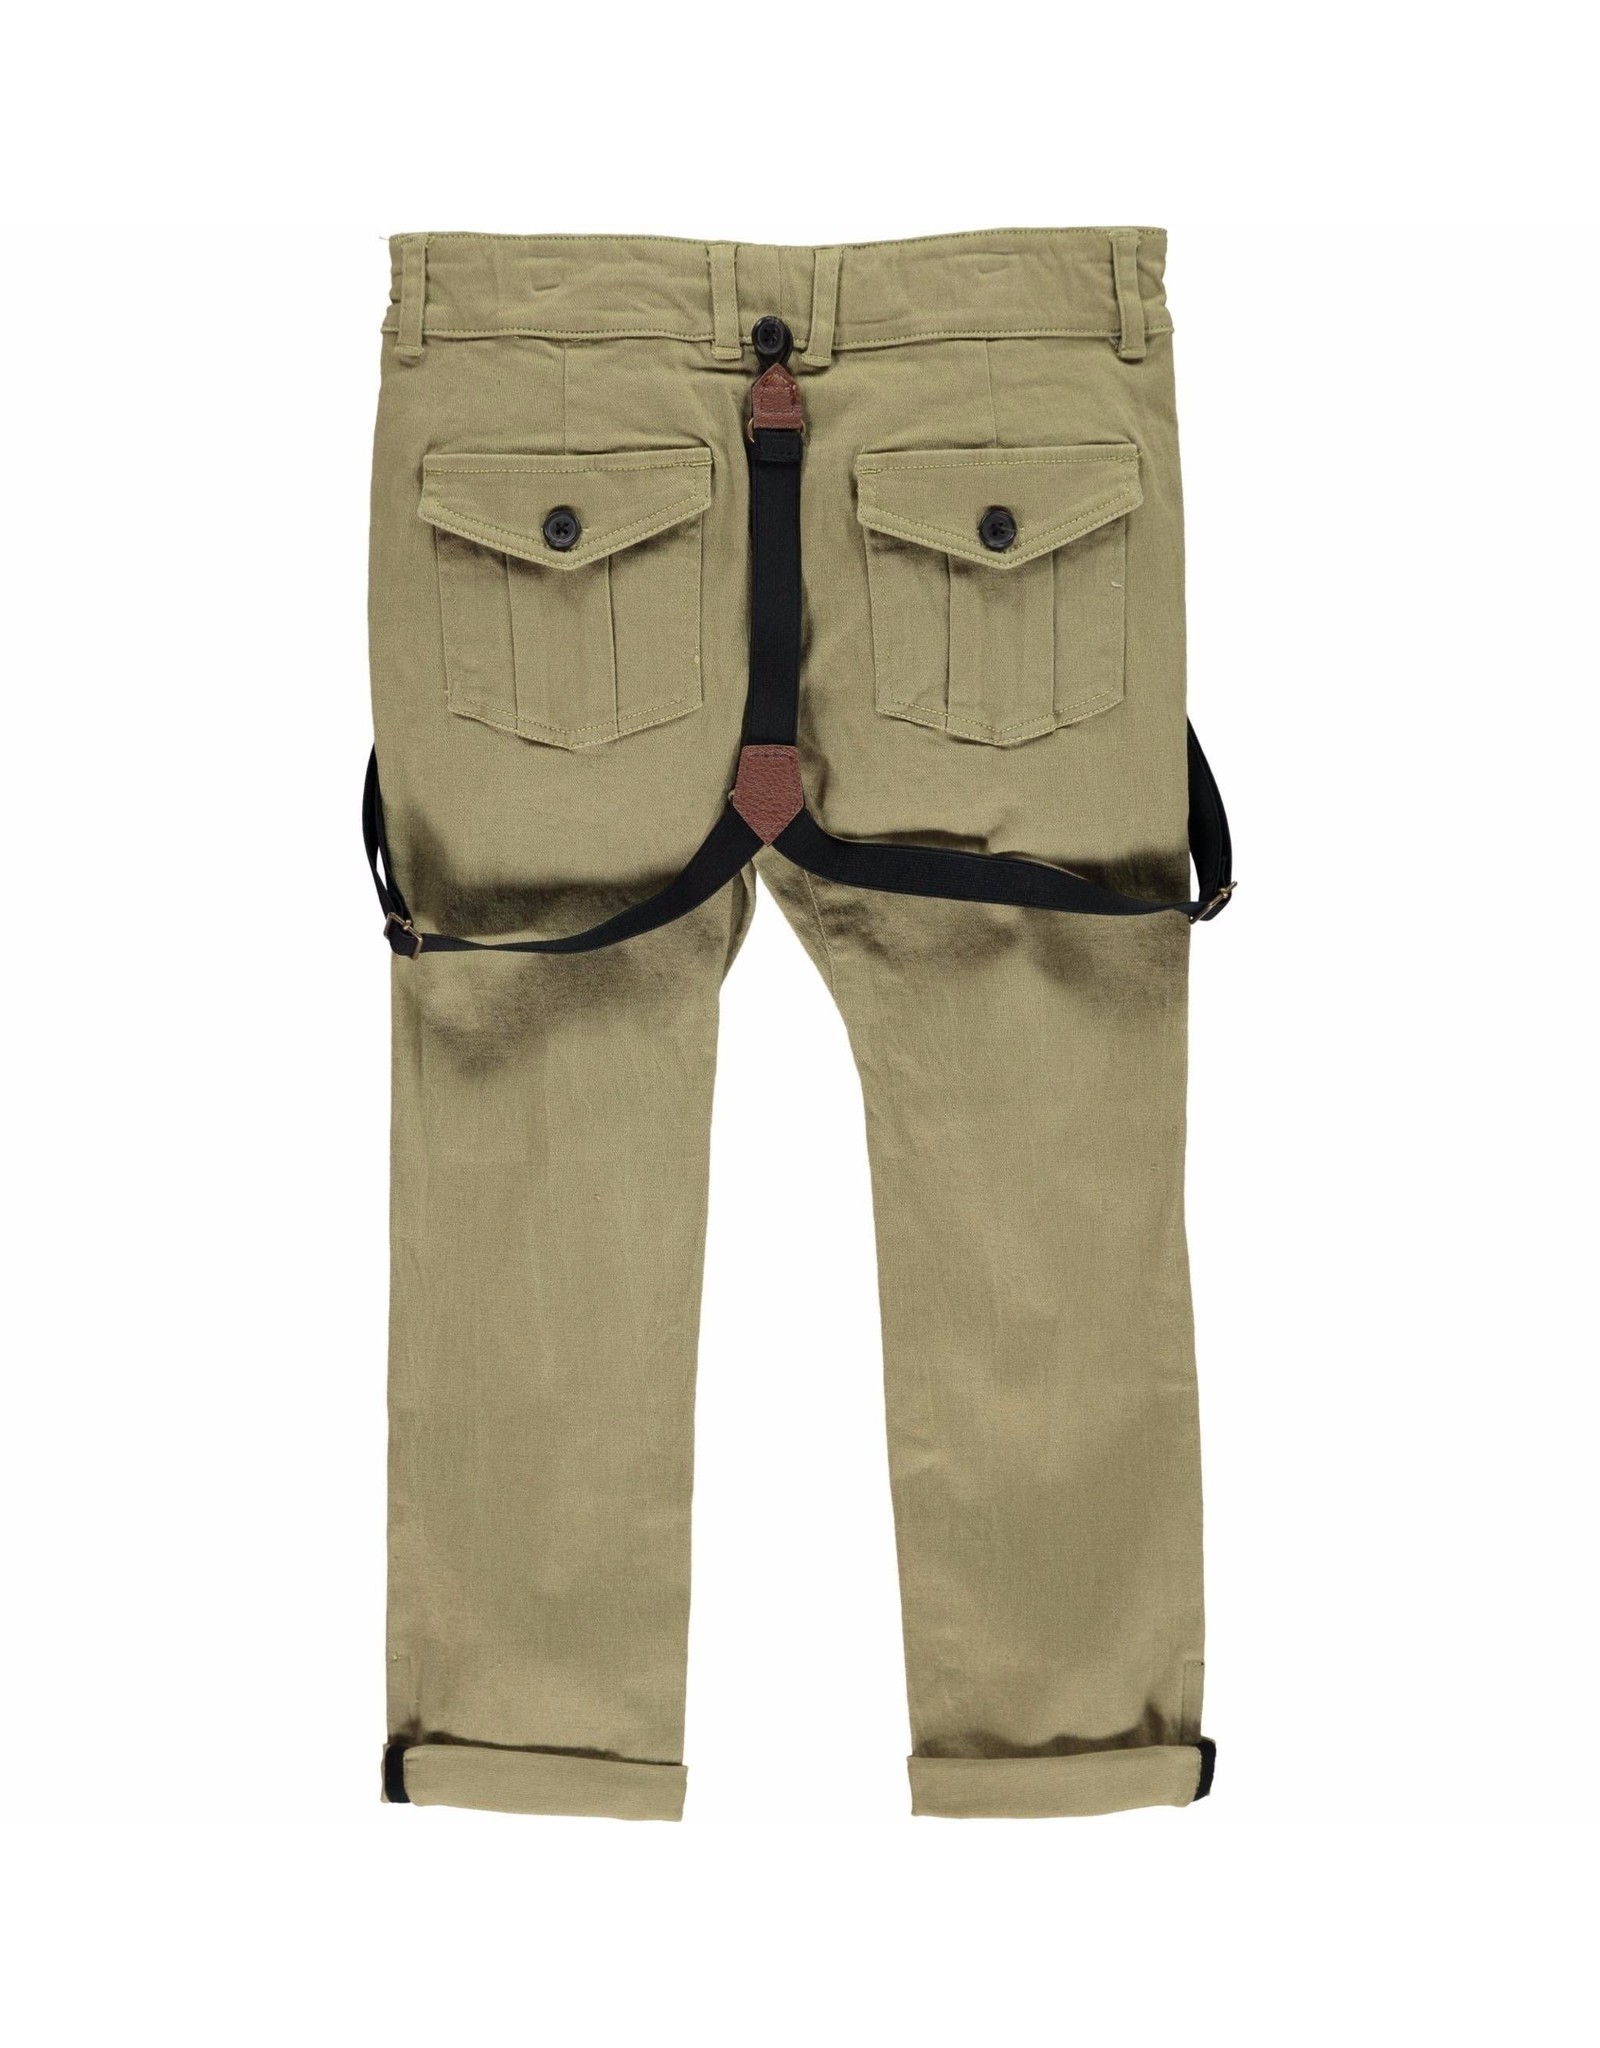 Me & Henry Olive Woven Trousers with removable braces